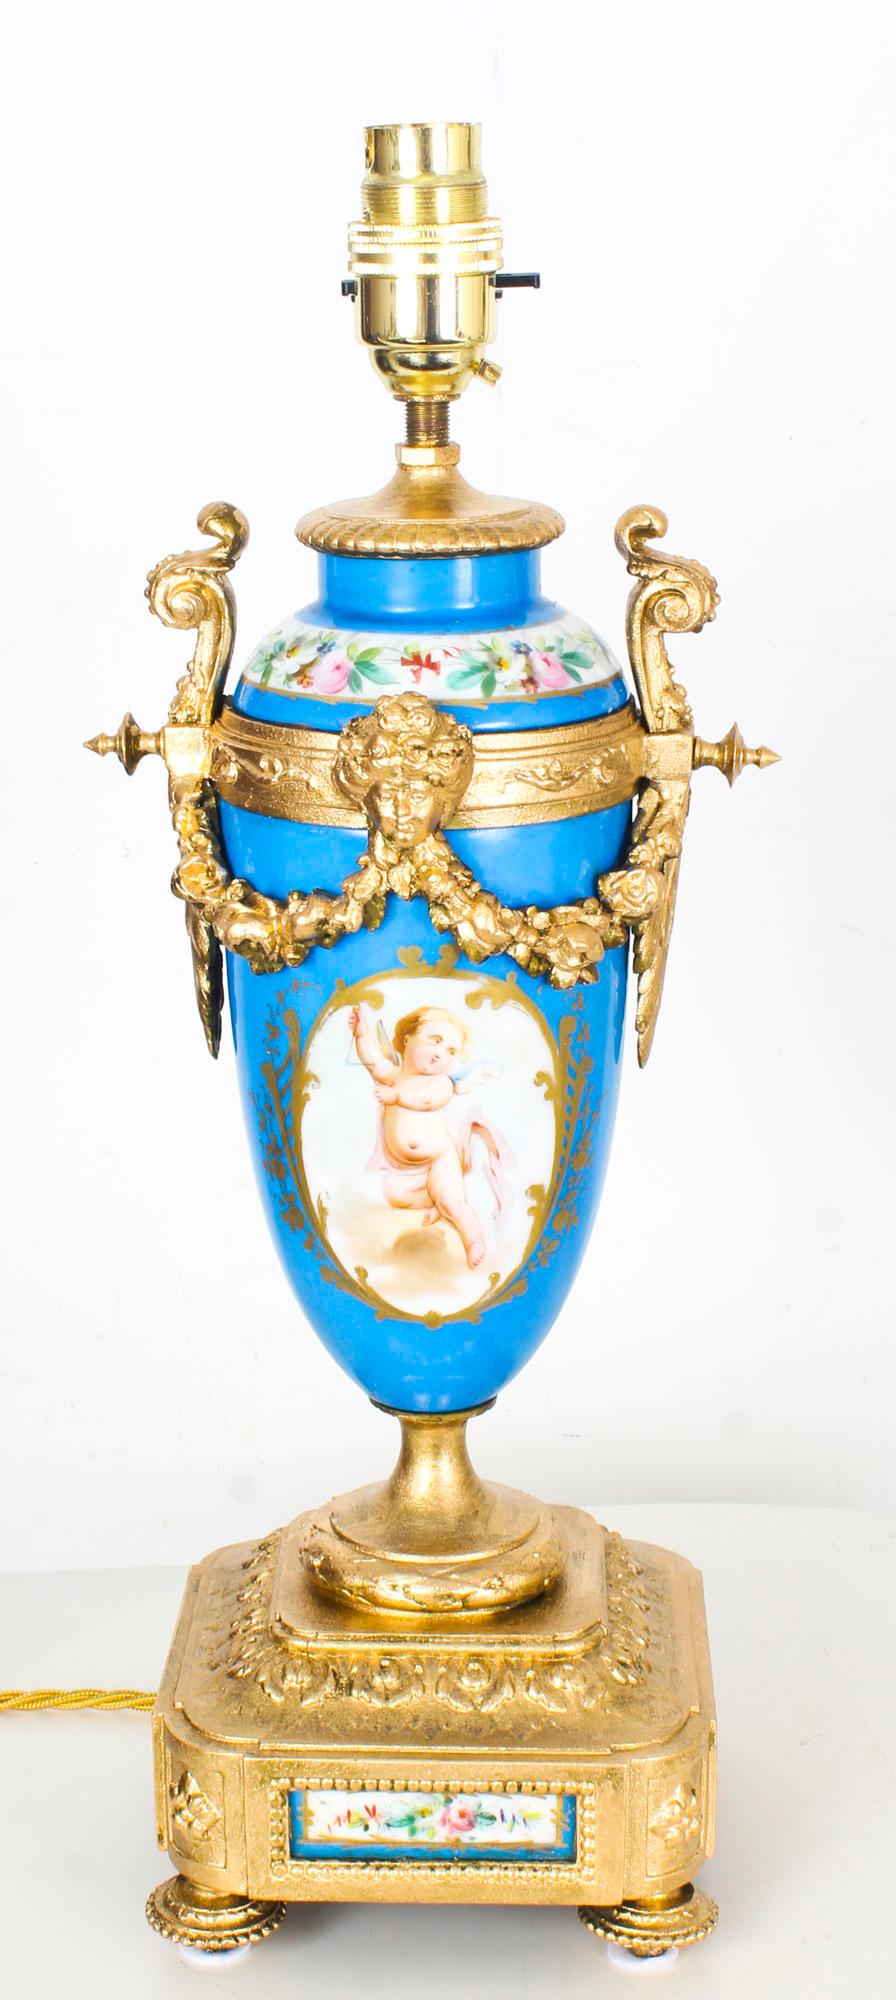 This is a beautiful antique pair of French Sevres porcelain vases converted to lamps, dating from the late 18th century.

The decorative twin handle vases are superbly decorated with hand-painted panels of romantic cherubs on one side and bouquets